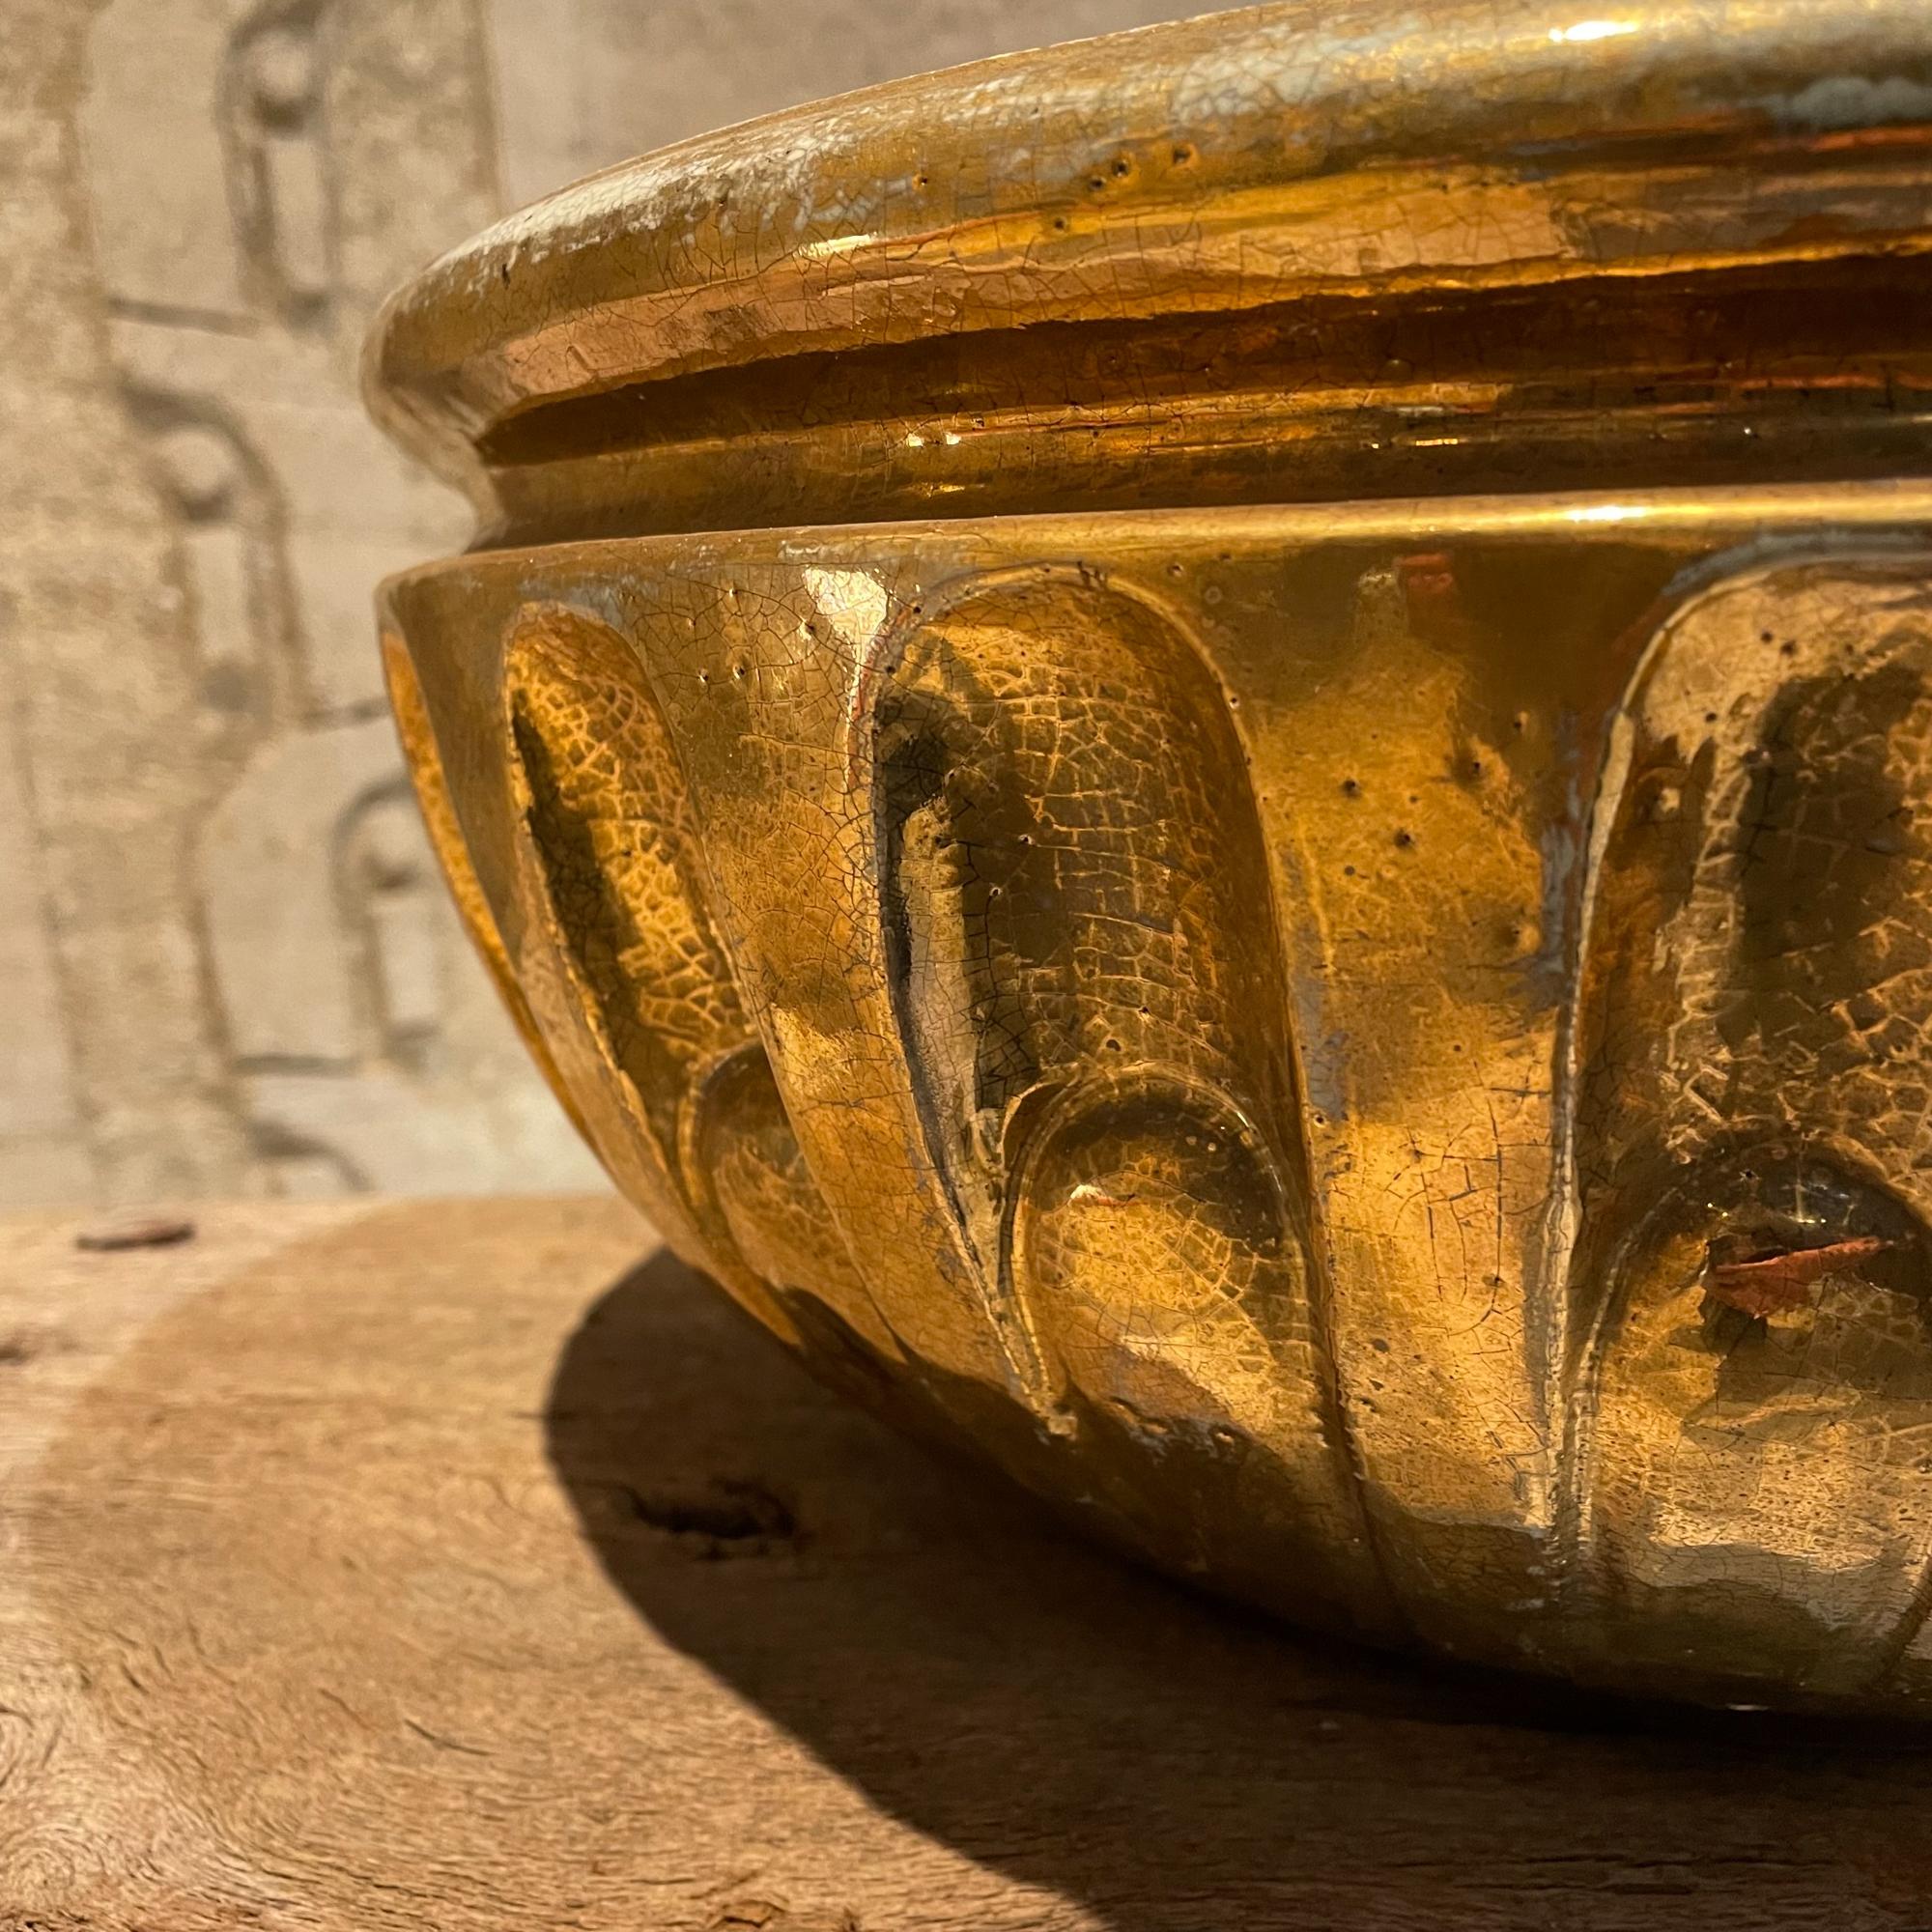 Heavy Gold Italian Ceramic Pottery Decorative Ribbed Bowl in a Gold Patinated Glaze circa 1960s Italy
Attributed to the designs of Aldo Londi by Bitossi. Maker stamp is unclear.
6.75T x 15.25 in Diameter inches
Presentation is preowned unrestored